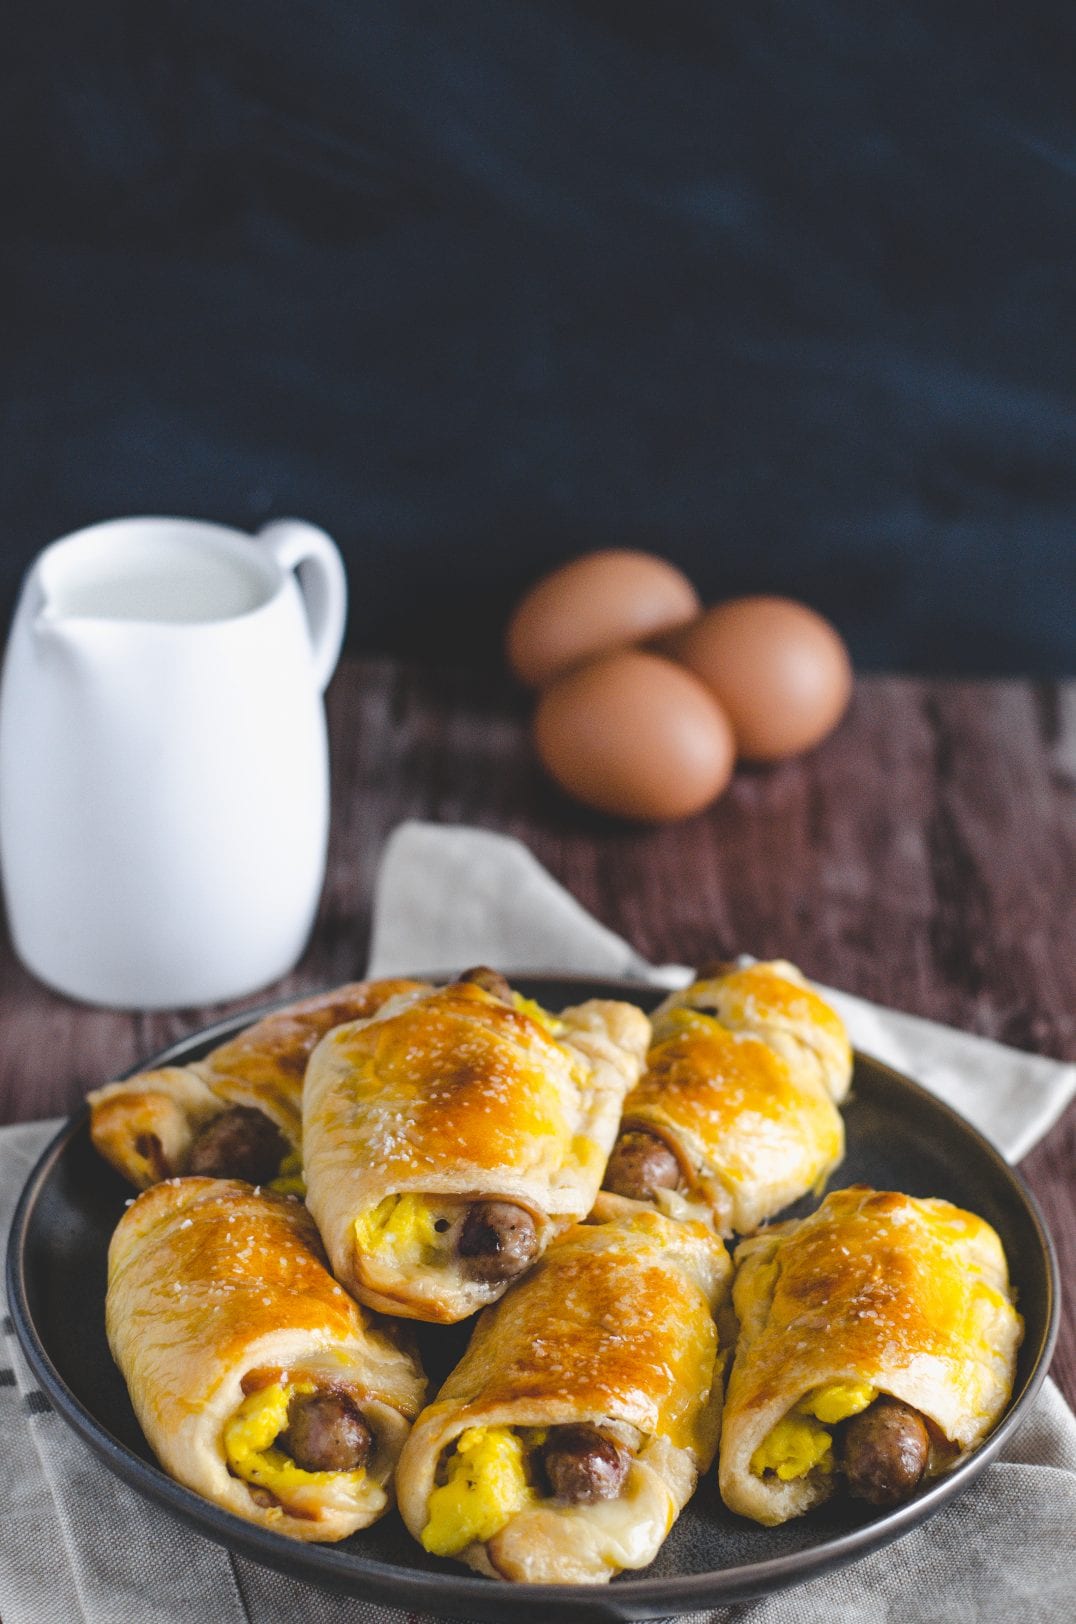 Sausage, Egg, and Cheese Crescent Rolls